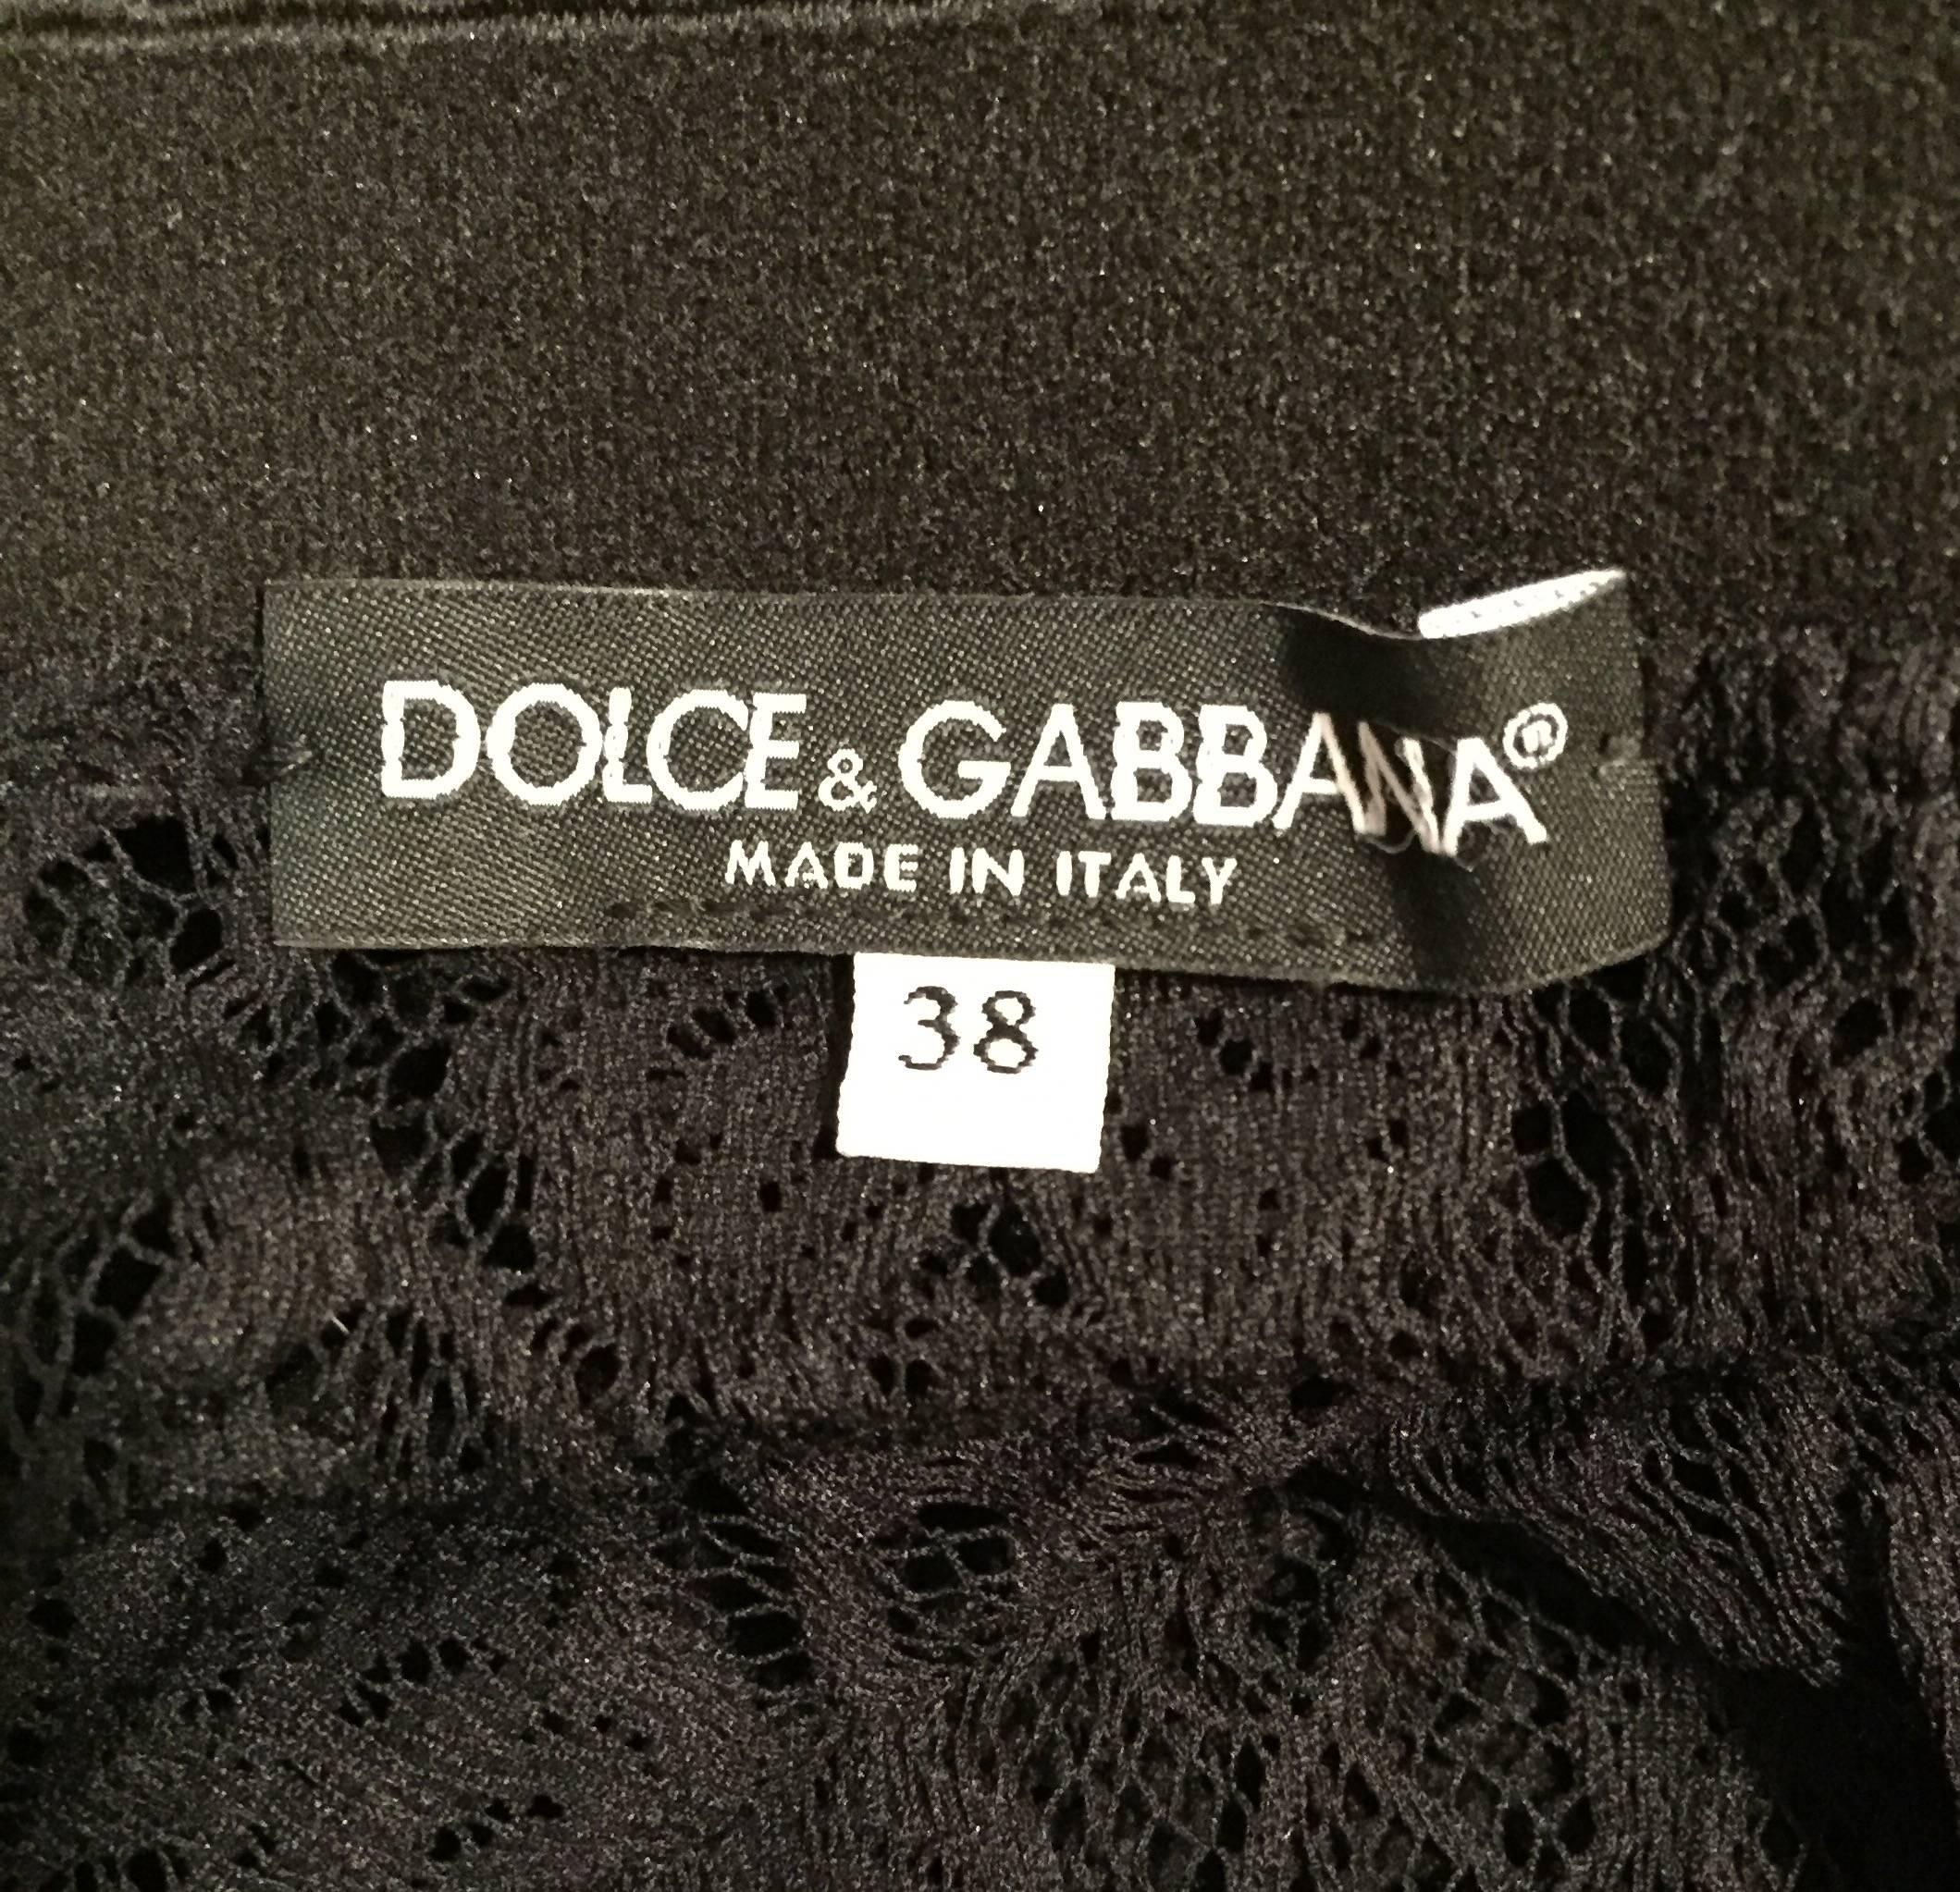 S/S 2000 Dolce & Gabbana Sheer Black Lace Leggings 38 In Excellent Condition In Yukon, OK